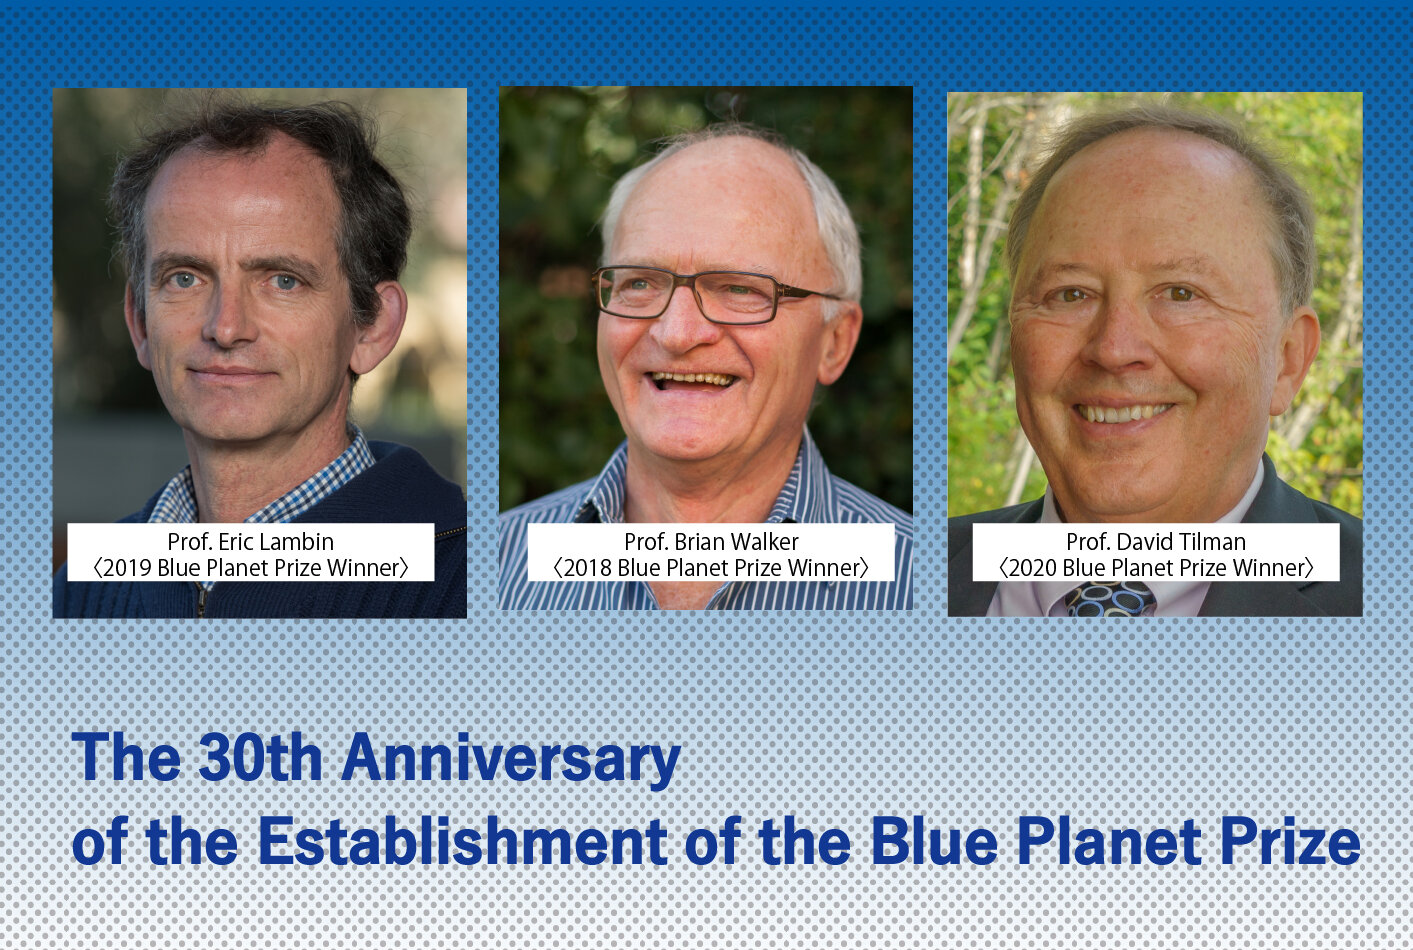 A joint statement by the former Blue Planet Prize laureates & Youth Environmental Advocacy have been released.